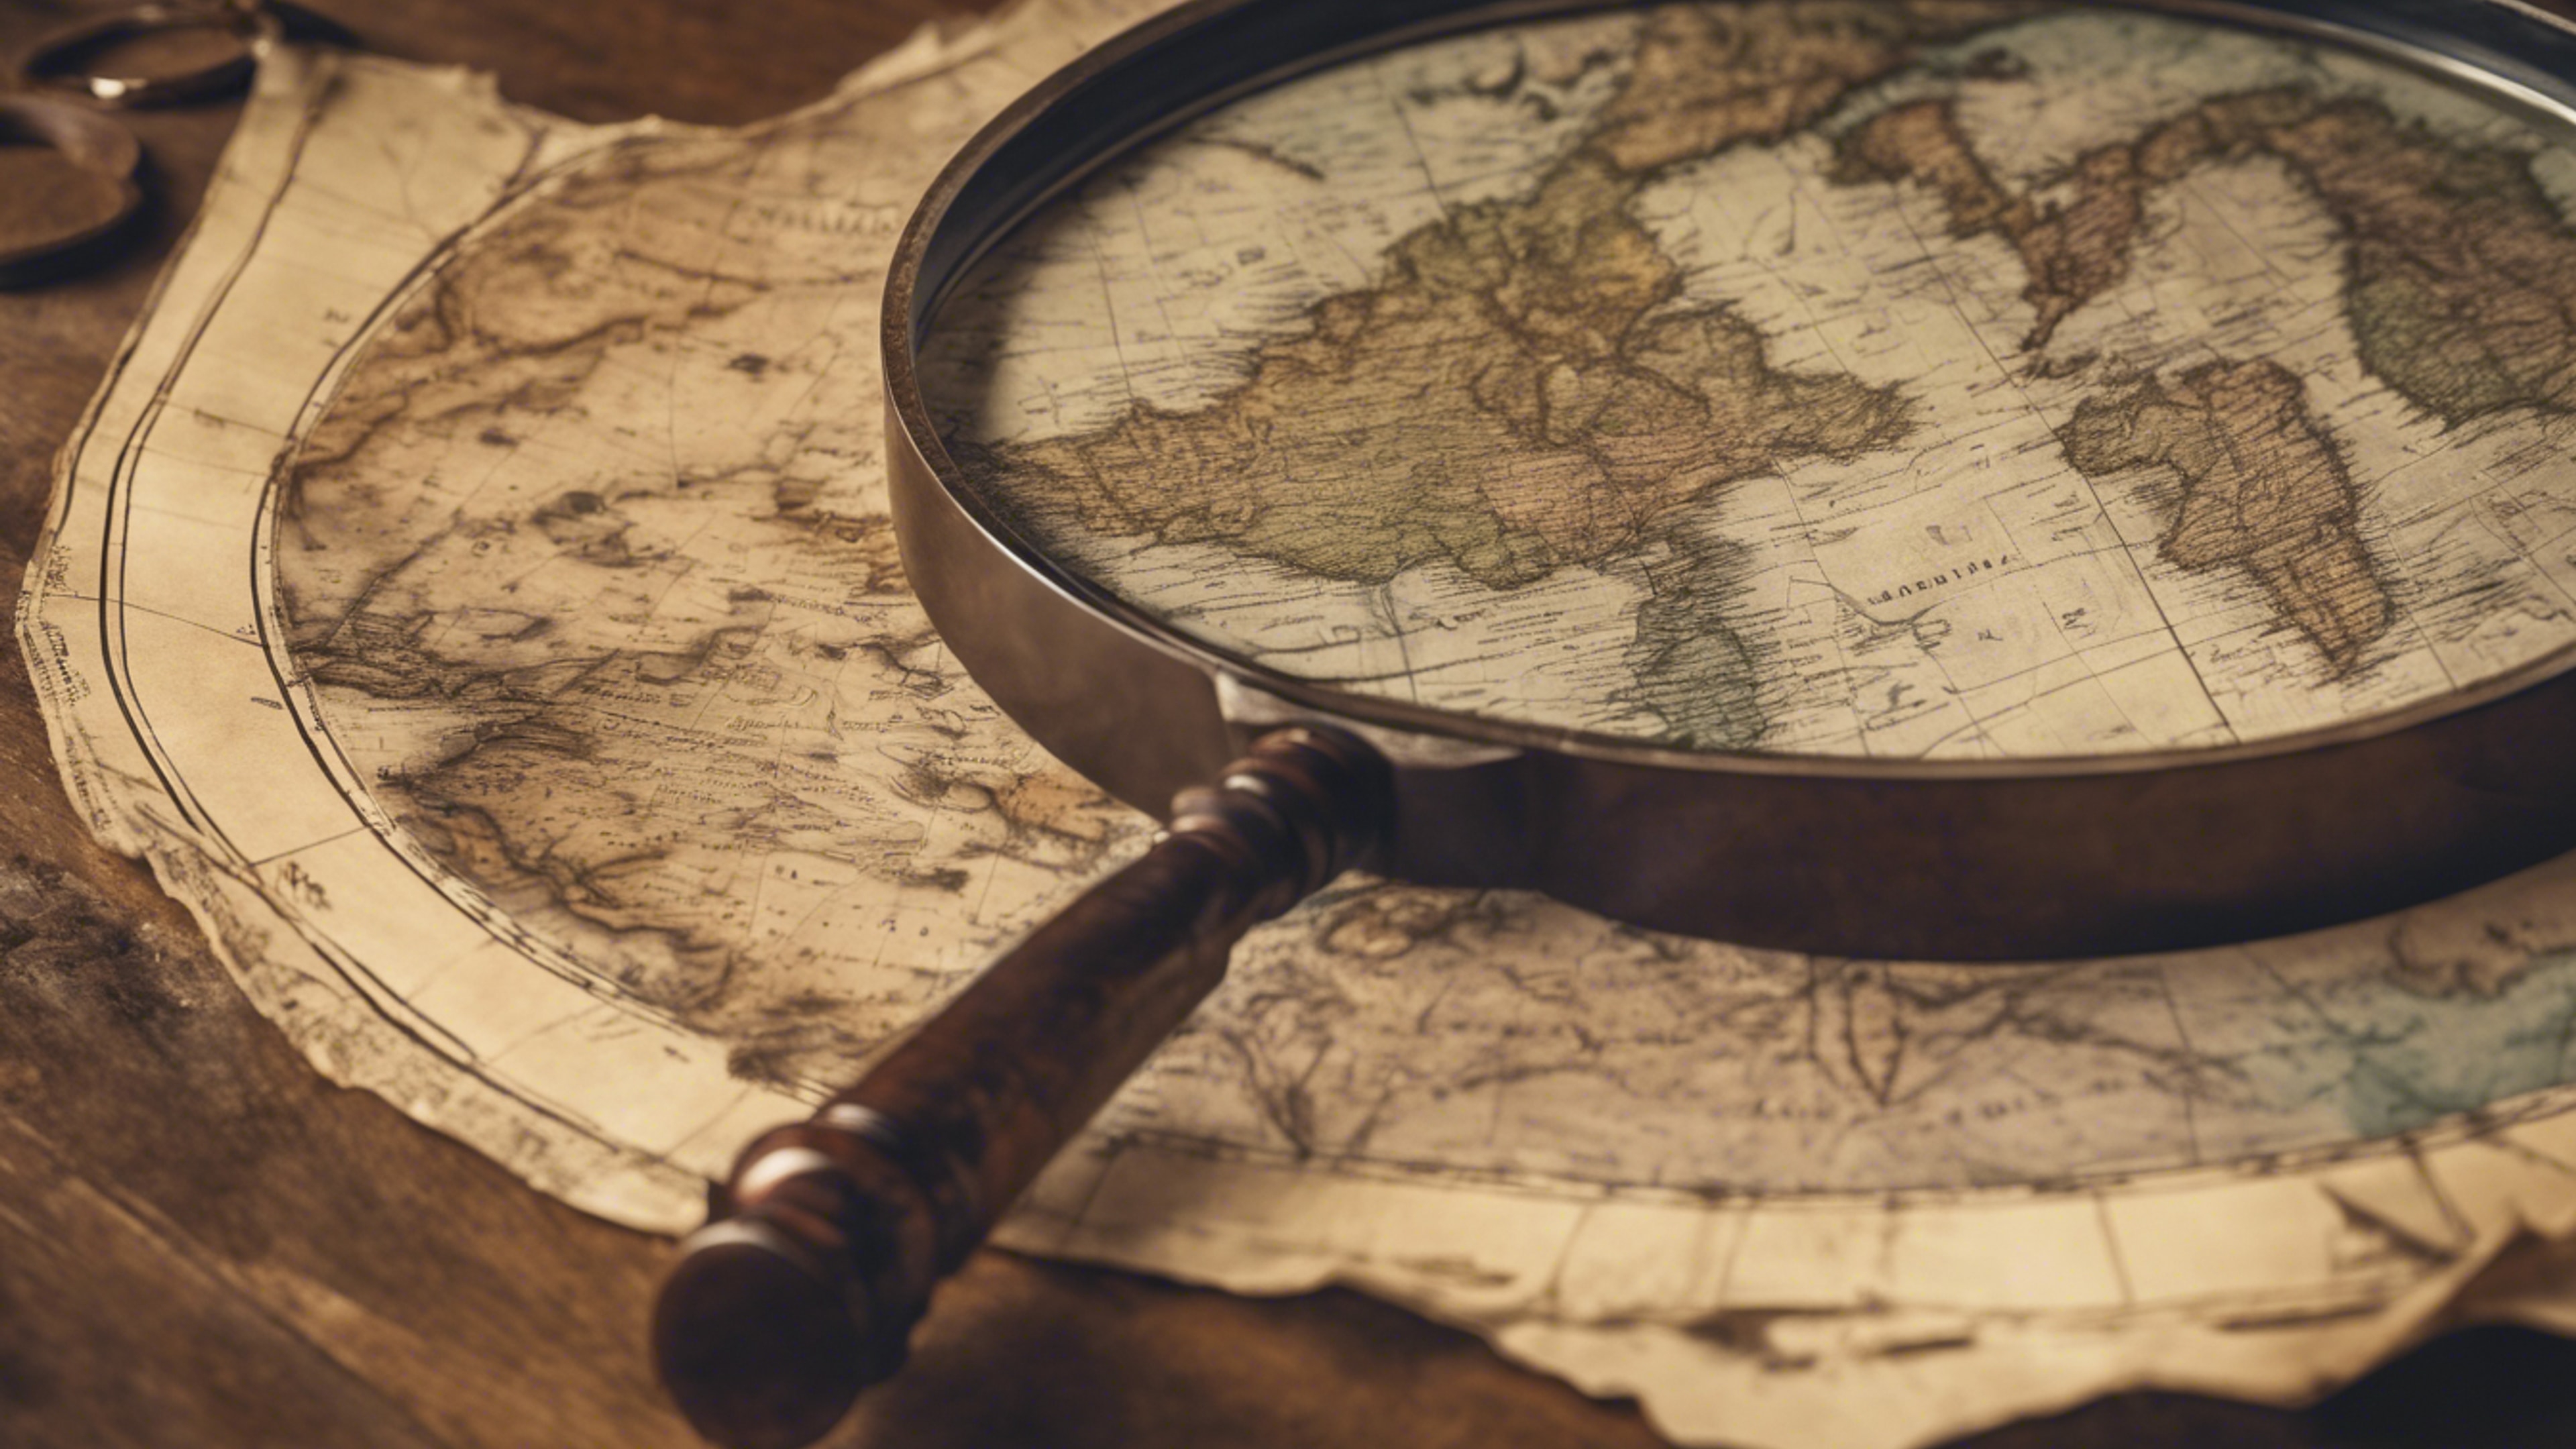 A vintage old world map spread out on a rustic wooden table next to an aged magnifying glass. Wallpaper[6aafbb7c0b9d49aab389]